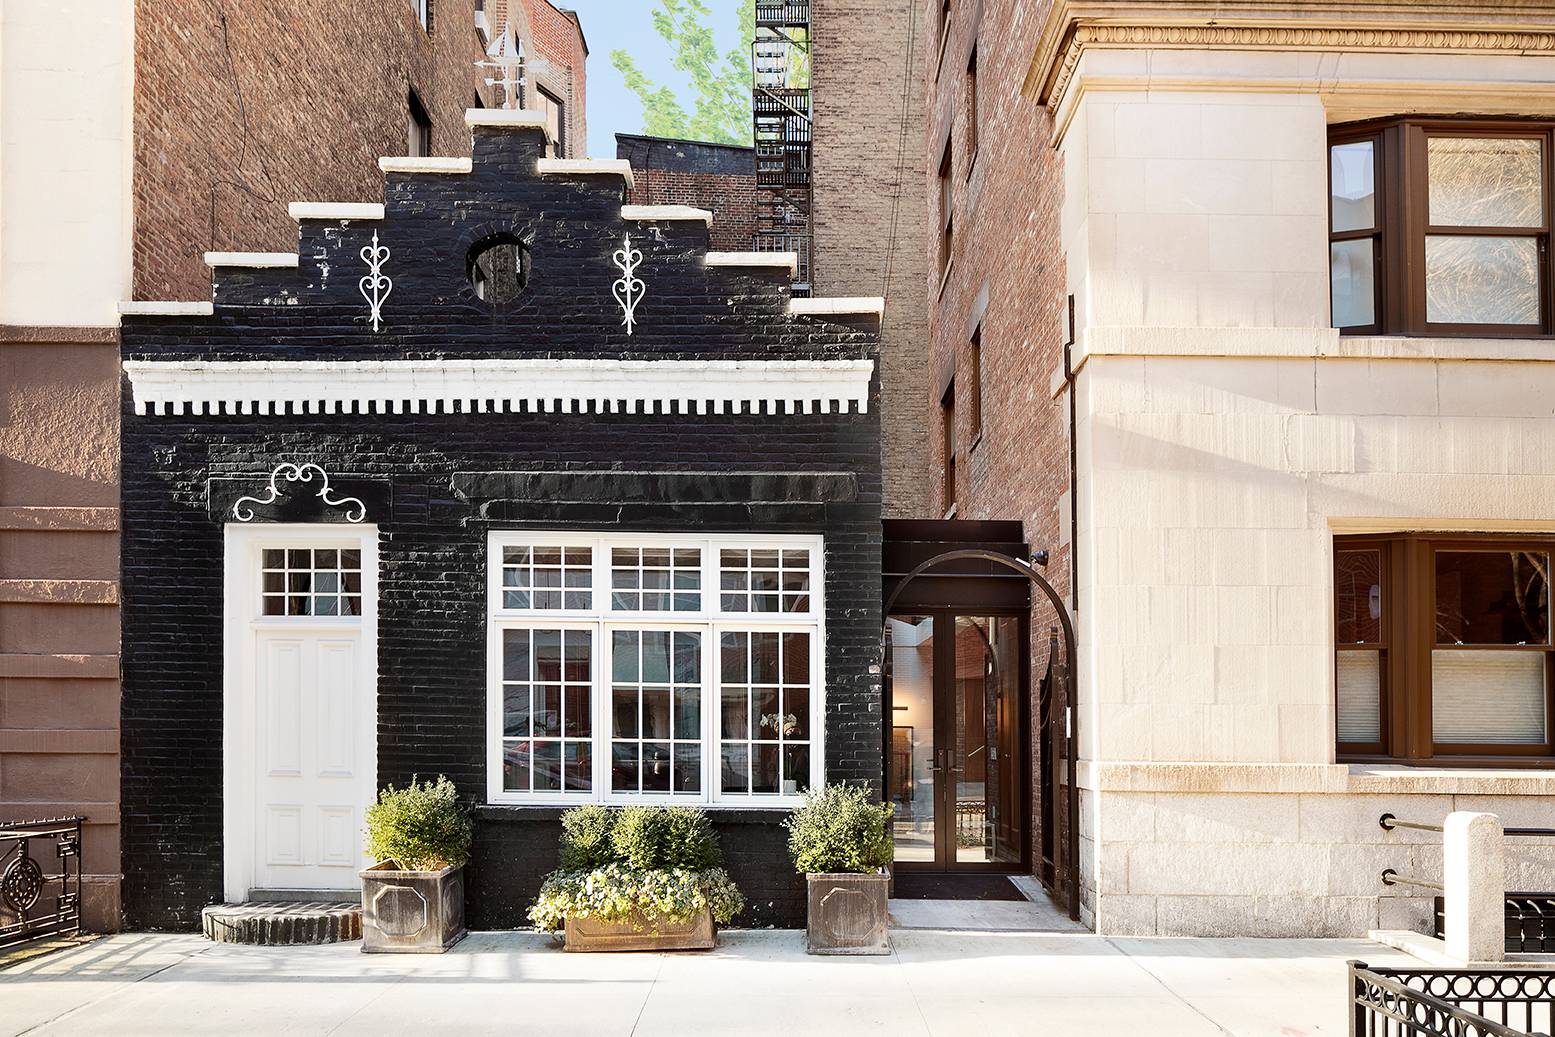 Rare opporunity to own both a Penthouse and separate Carriage House in the same building.